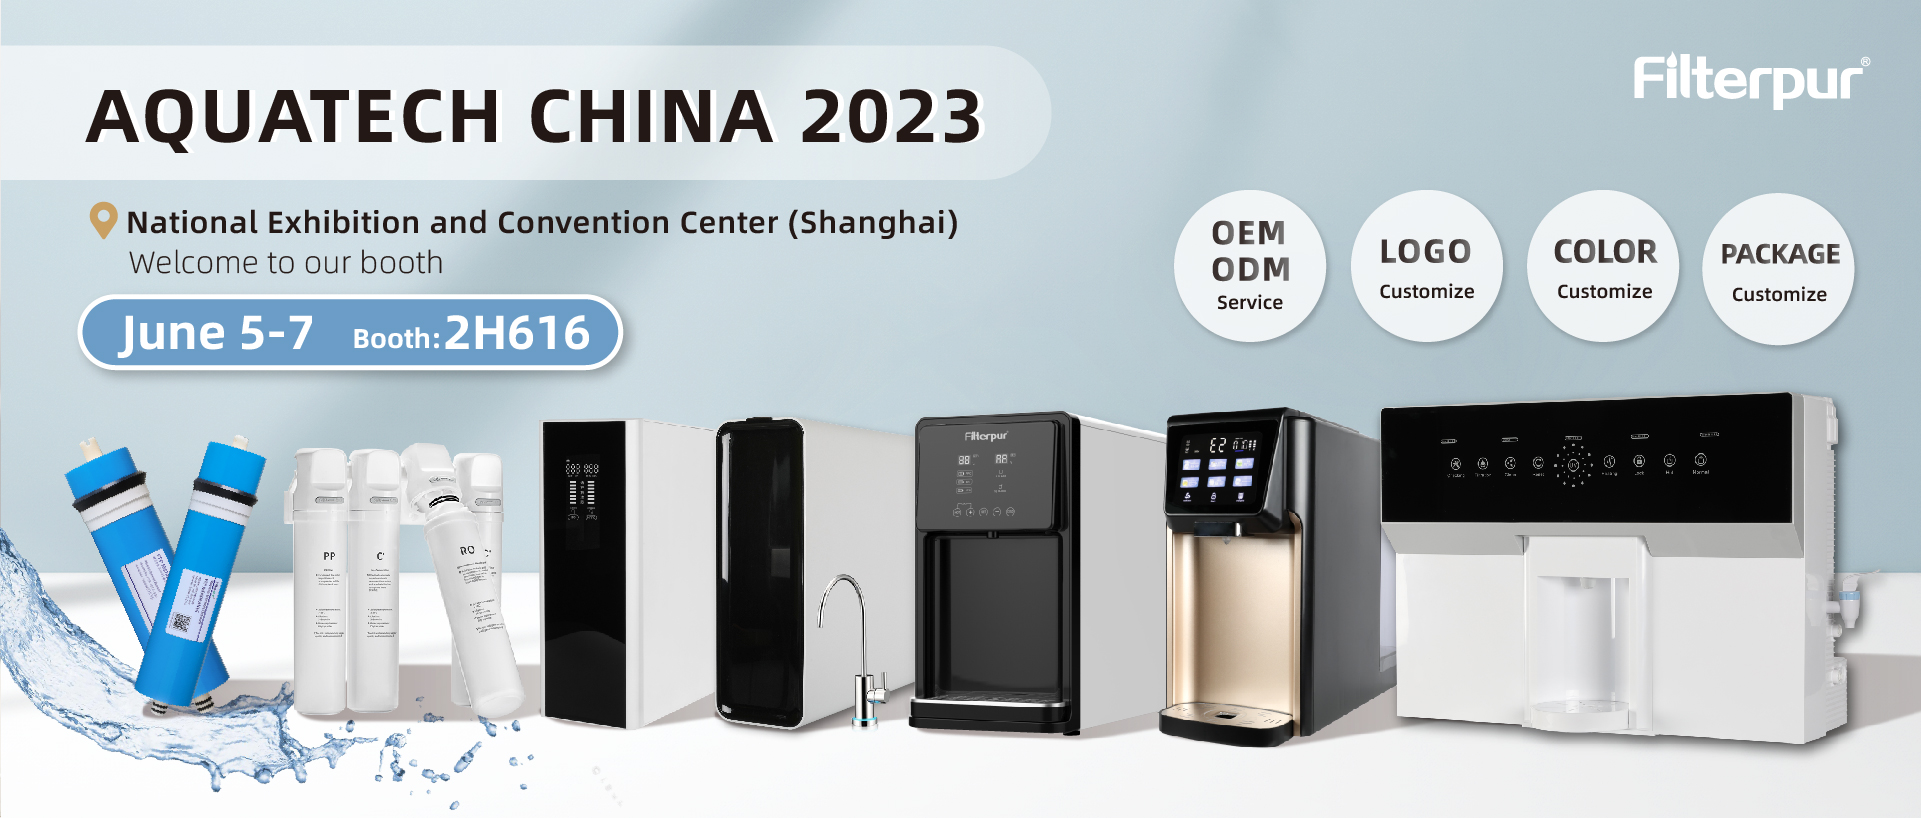 Welcome to our booth on Aquatech China 2023